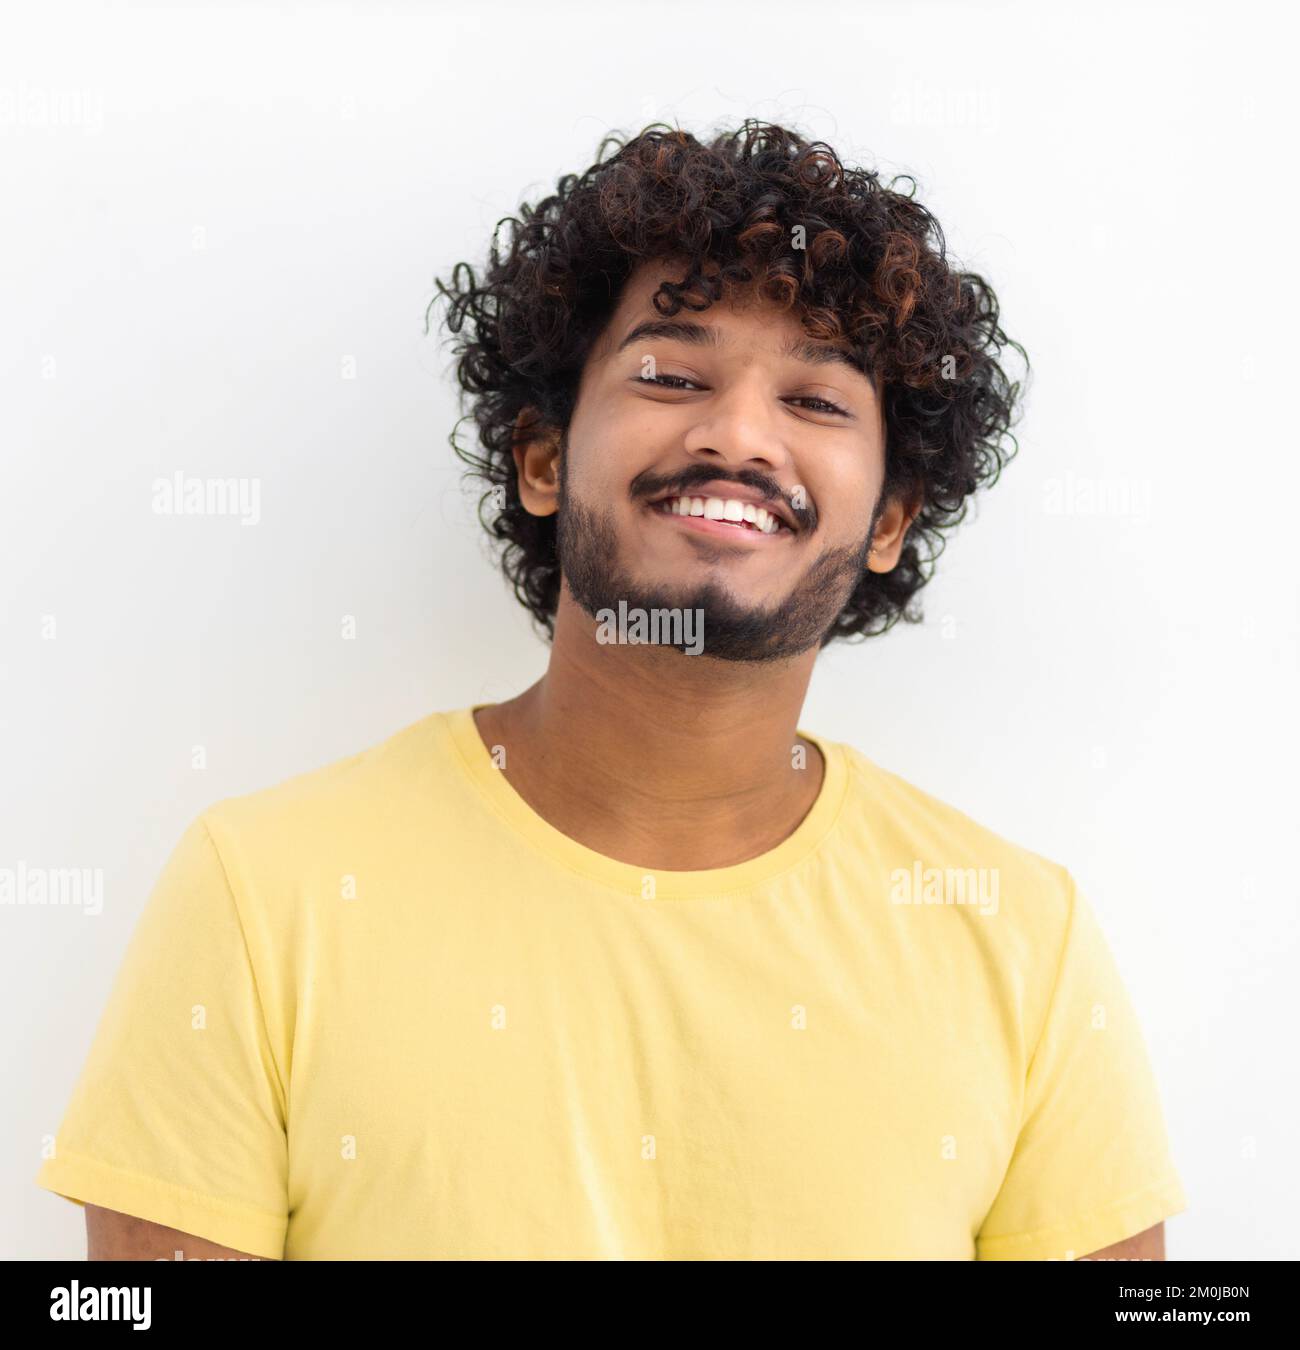 man with curly hair and happy smile. Young Indian male student smiling joyfully standing on a white background Stock Photo